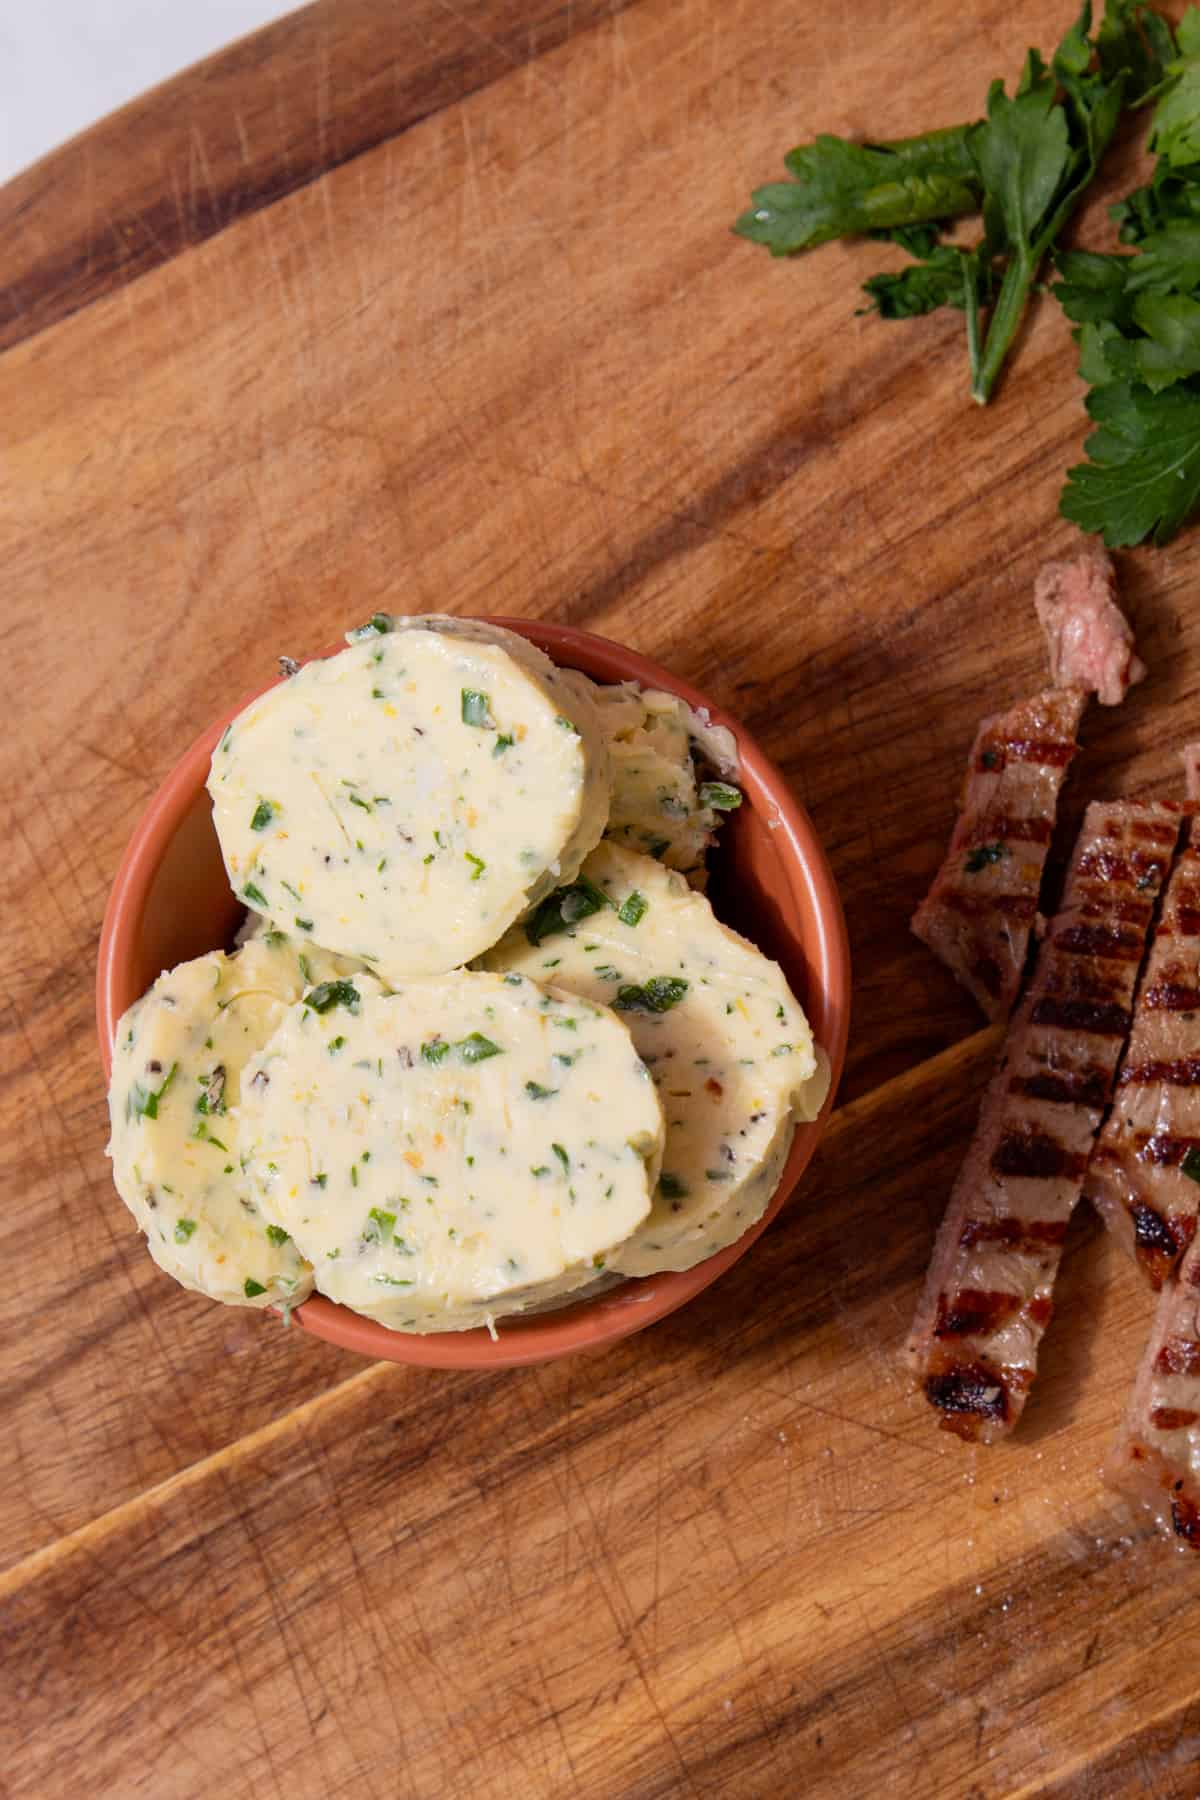 Rounds of herby butter in a smal bowl next to strips of charred steak on a wooden chopping board.